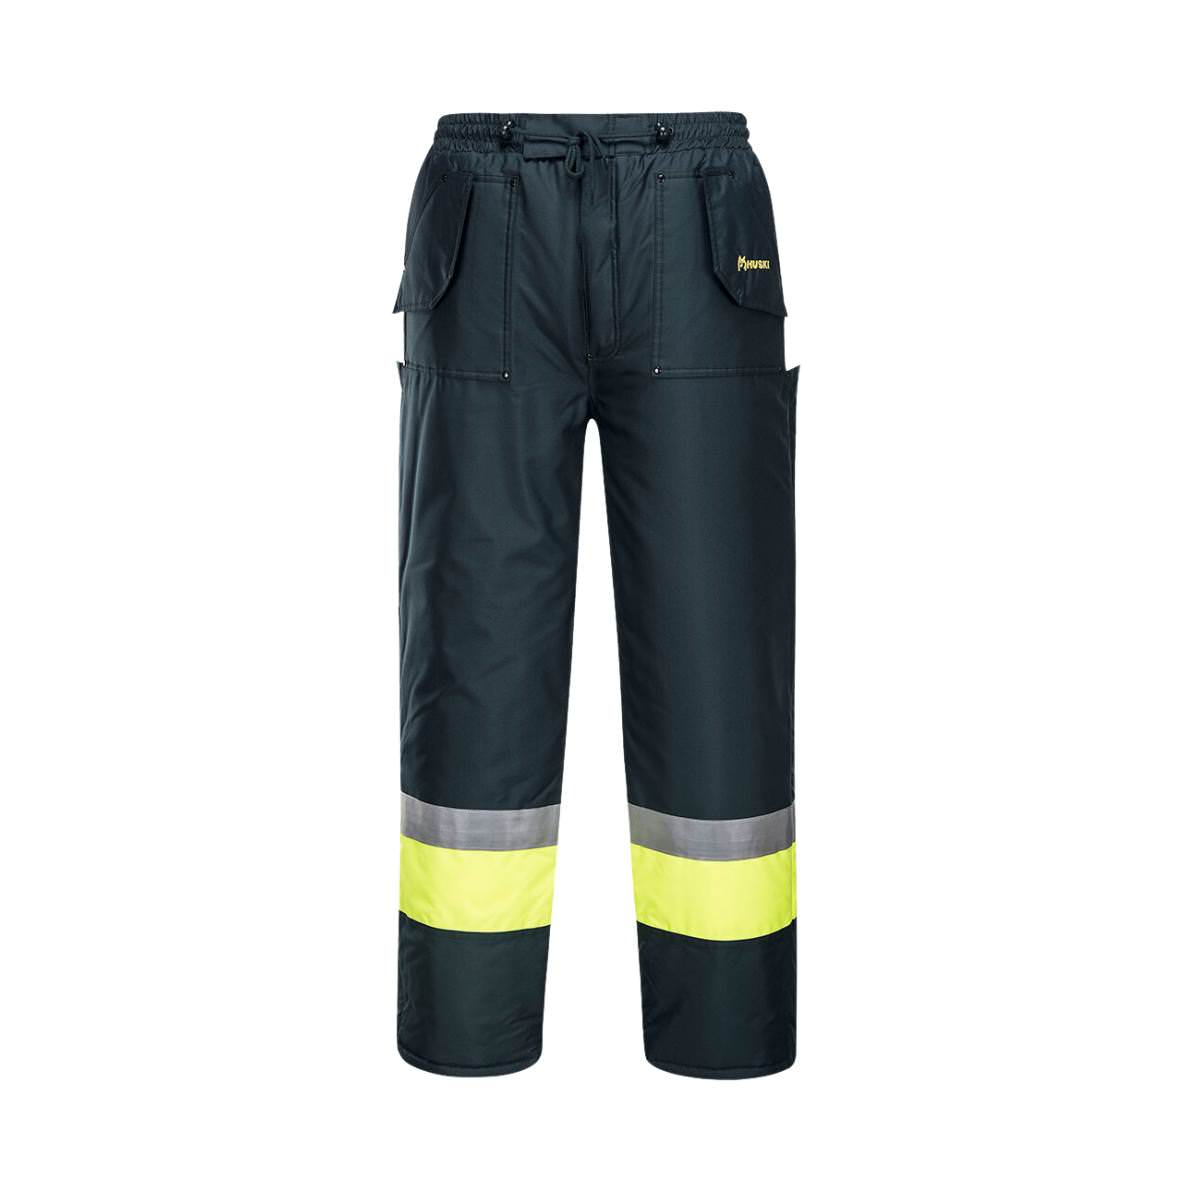 Freezer Wear Portwest brand provides the best protection in